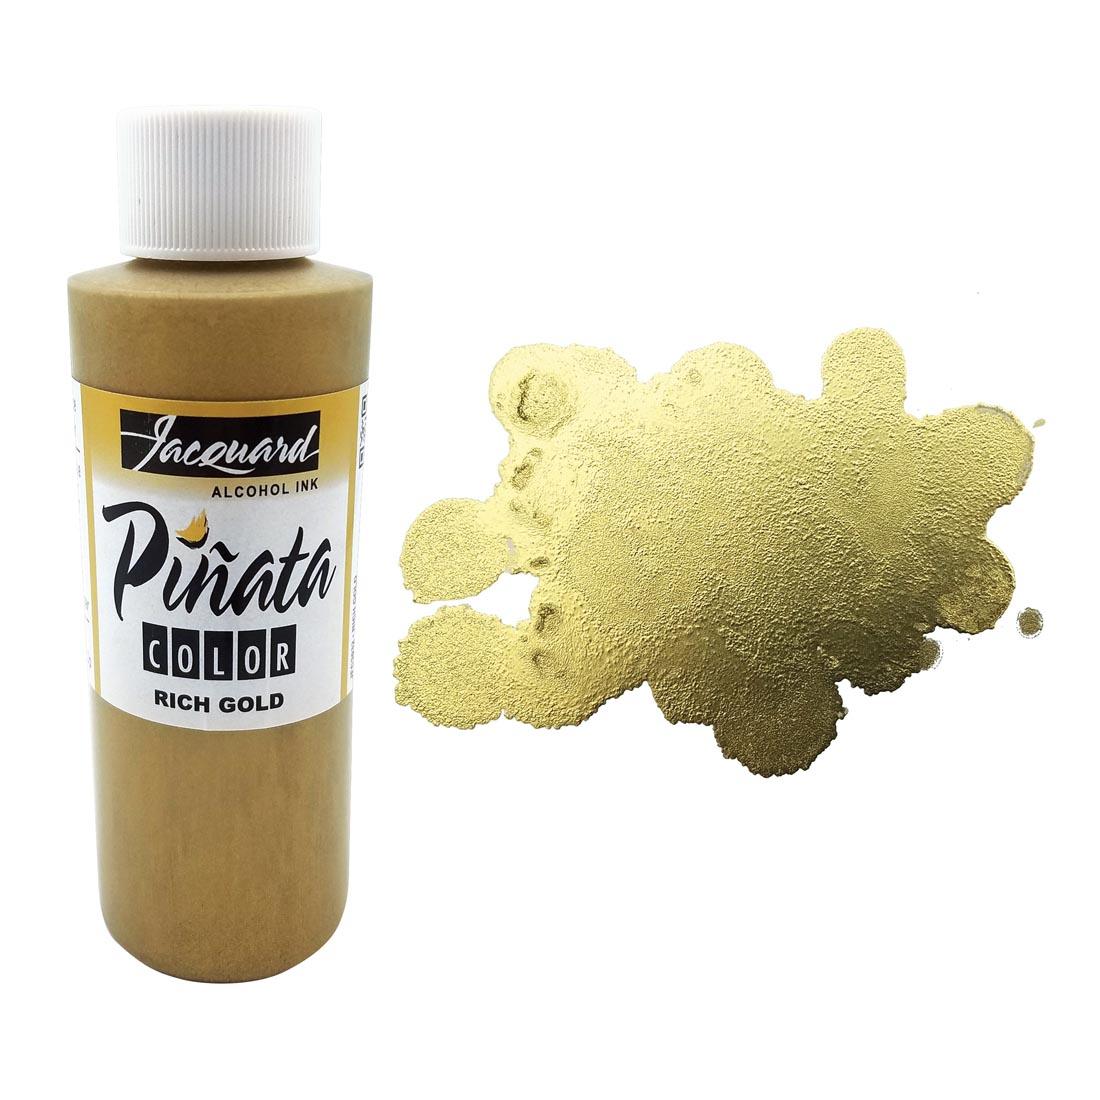 Bottle of Rich Gold Jacquard Pinata Color Alcohol Ink beside an example color swatch